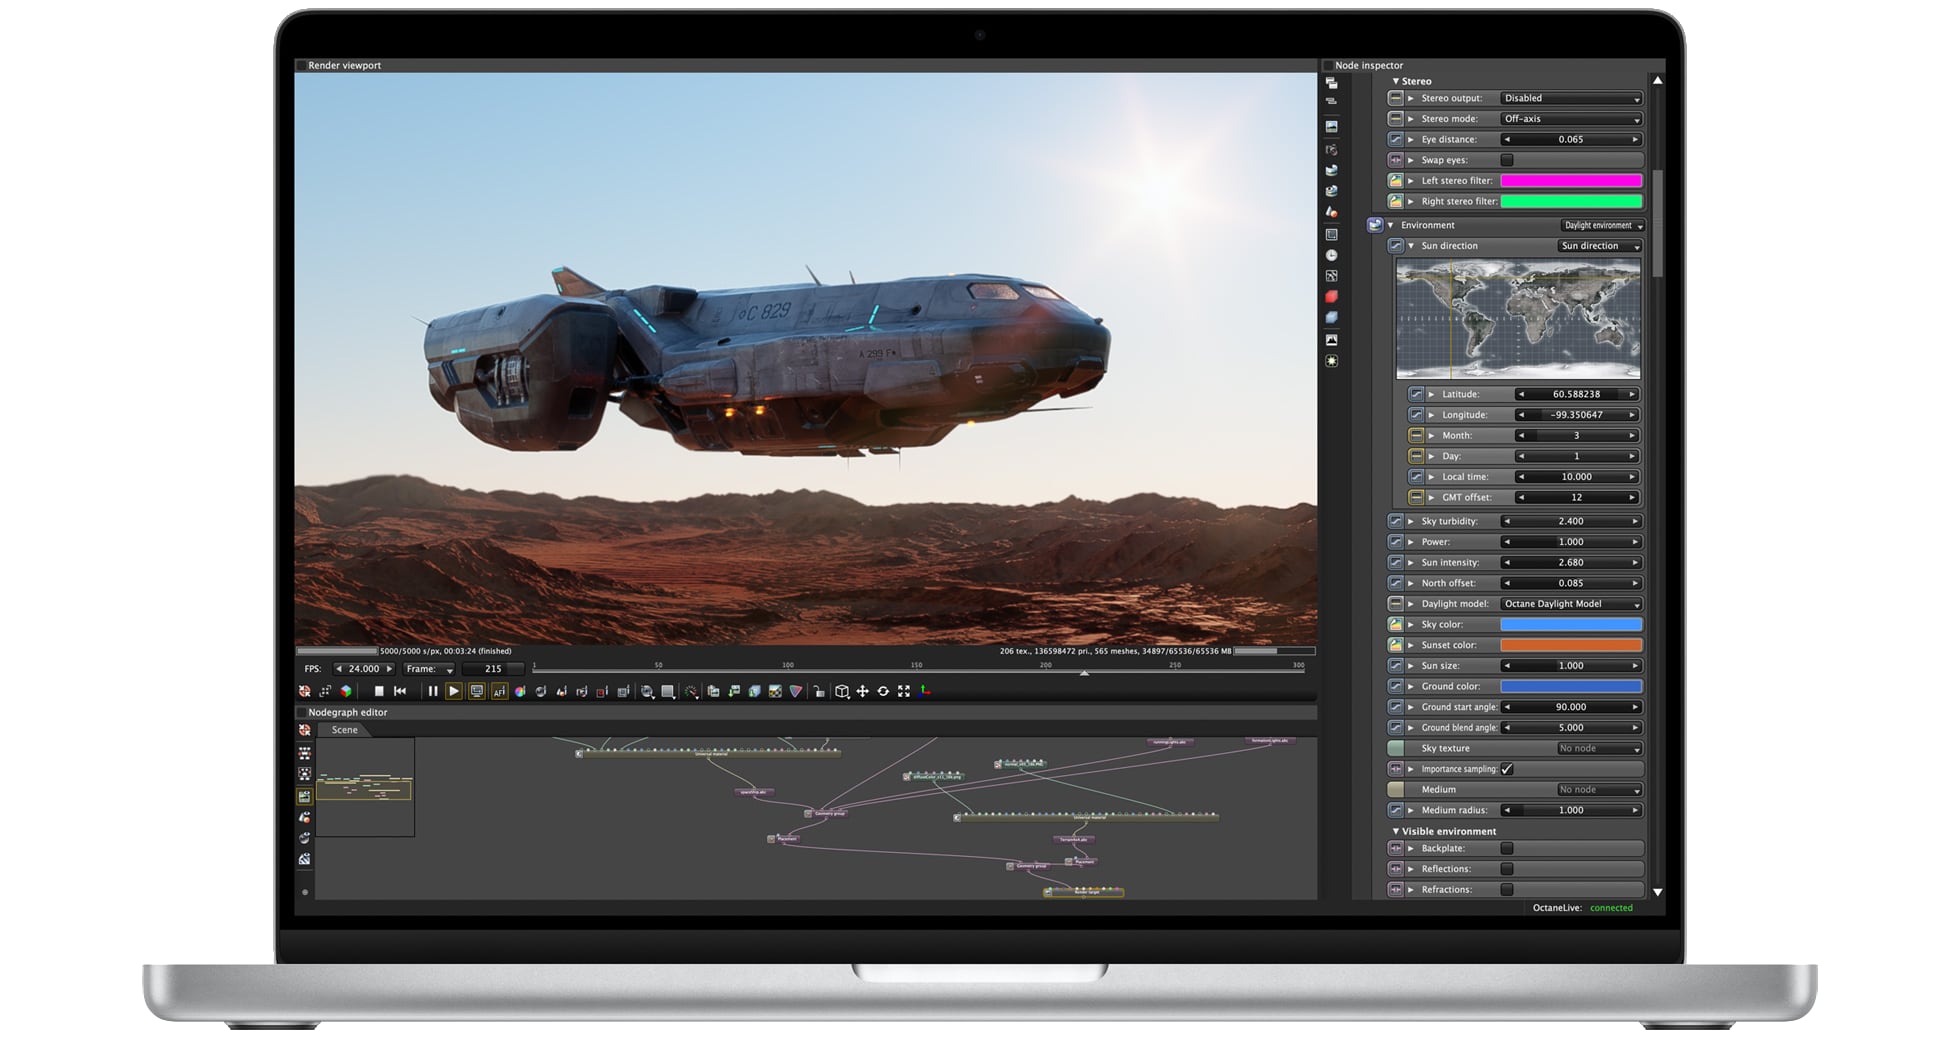 Apple's marketing image showing the redesigned 16-inch MacBook Pro model year 2021 running a fullscreen app 